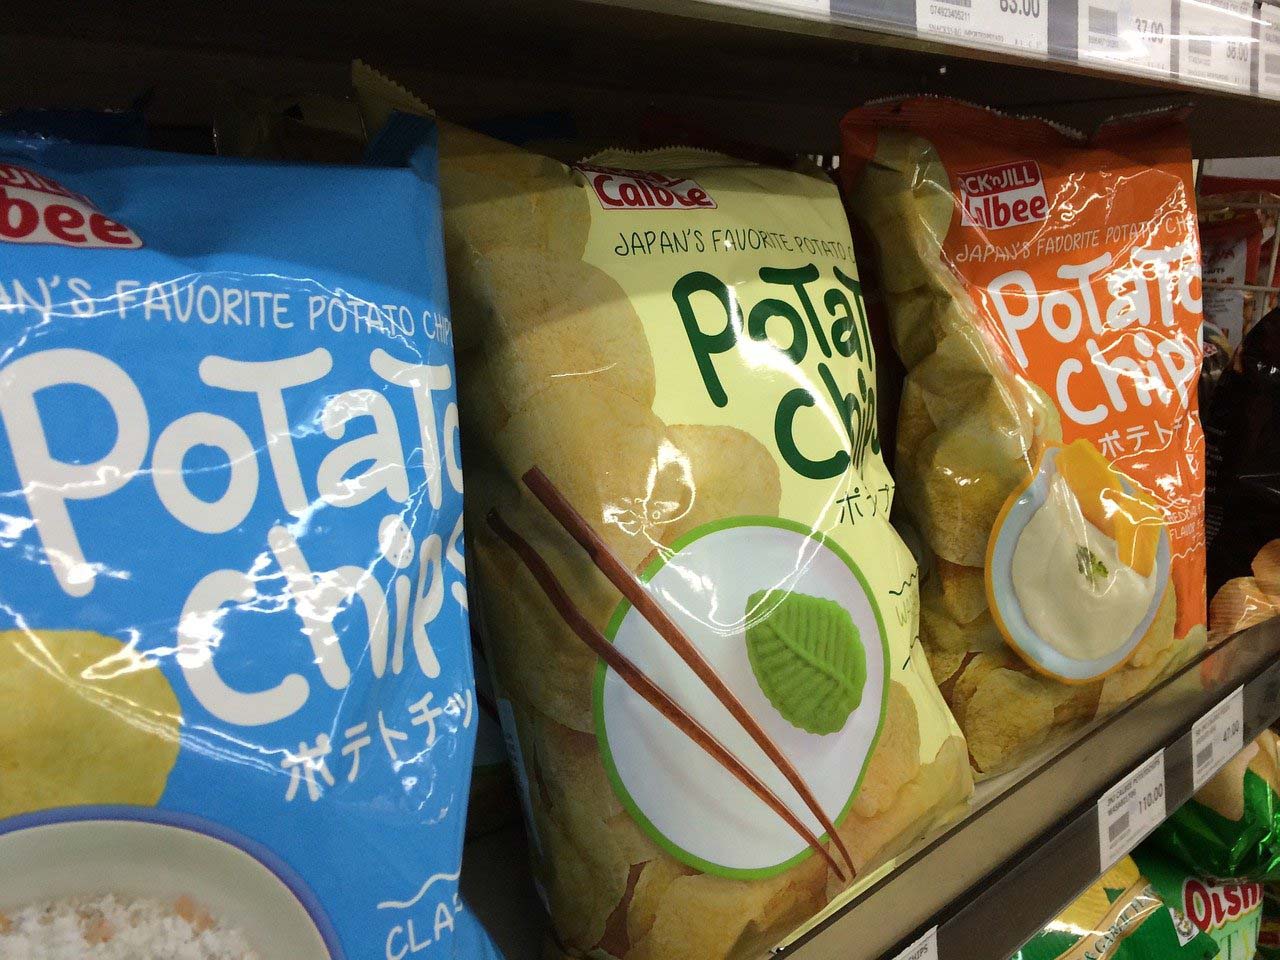 A photo shows several colorful potato chip bags on a shelf in a grocery store. Credit: pdiaz/Pixabay